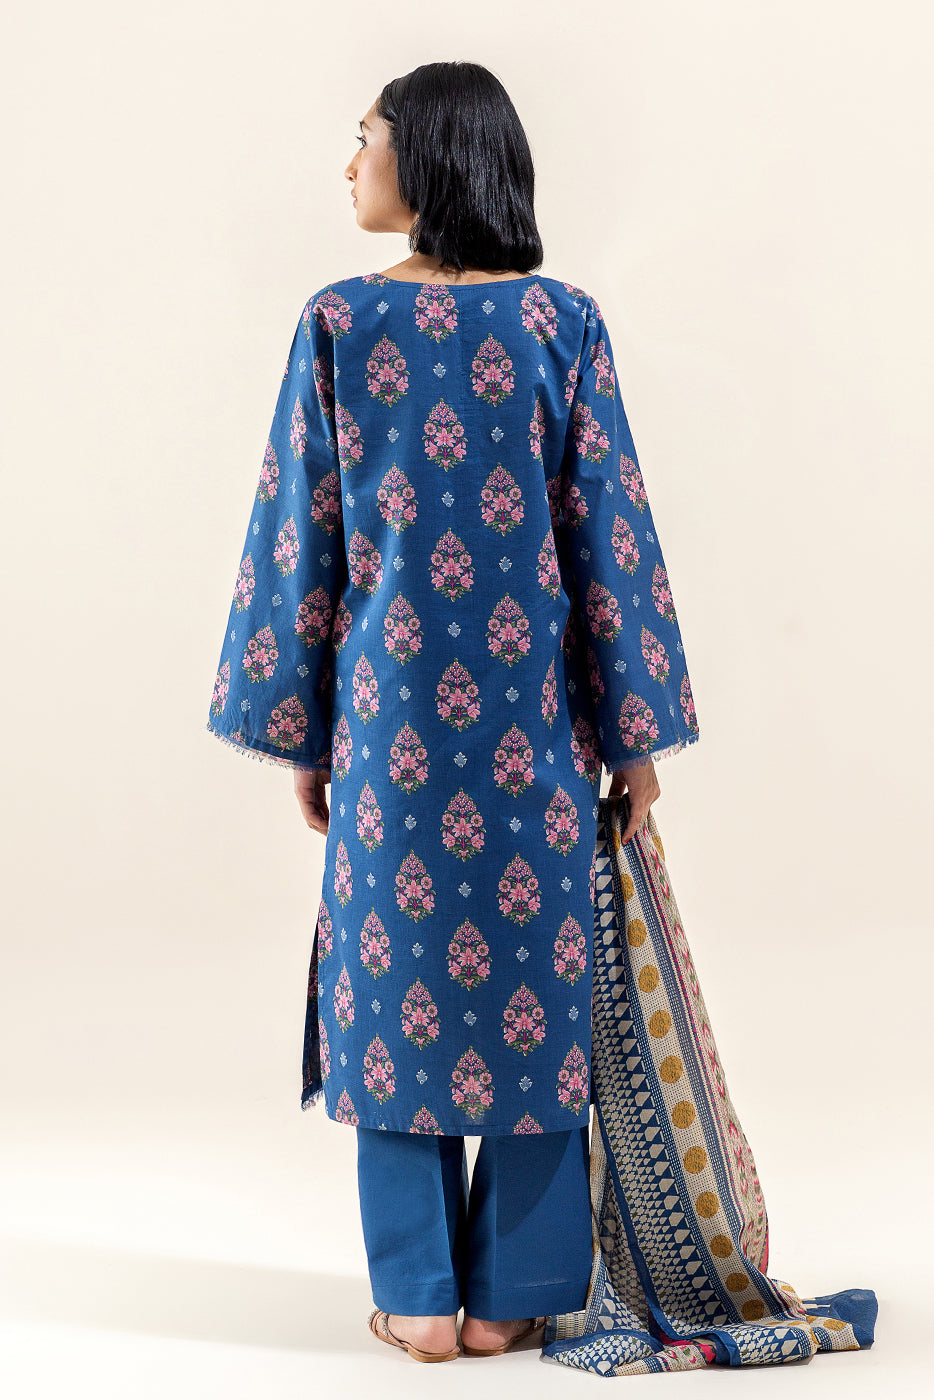 3 PIECE PRINTED LAWN SUIT-AEGEAN BLOOM (UNSTITCHED)